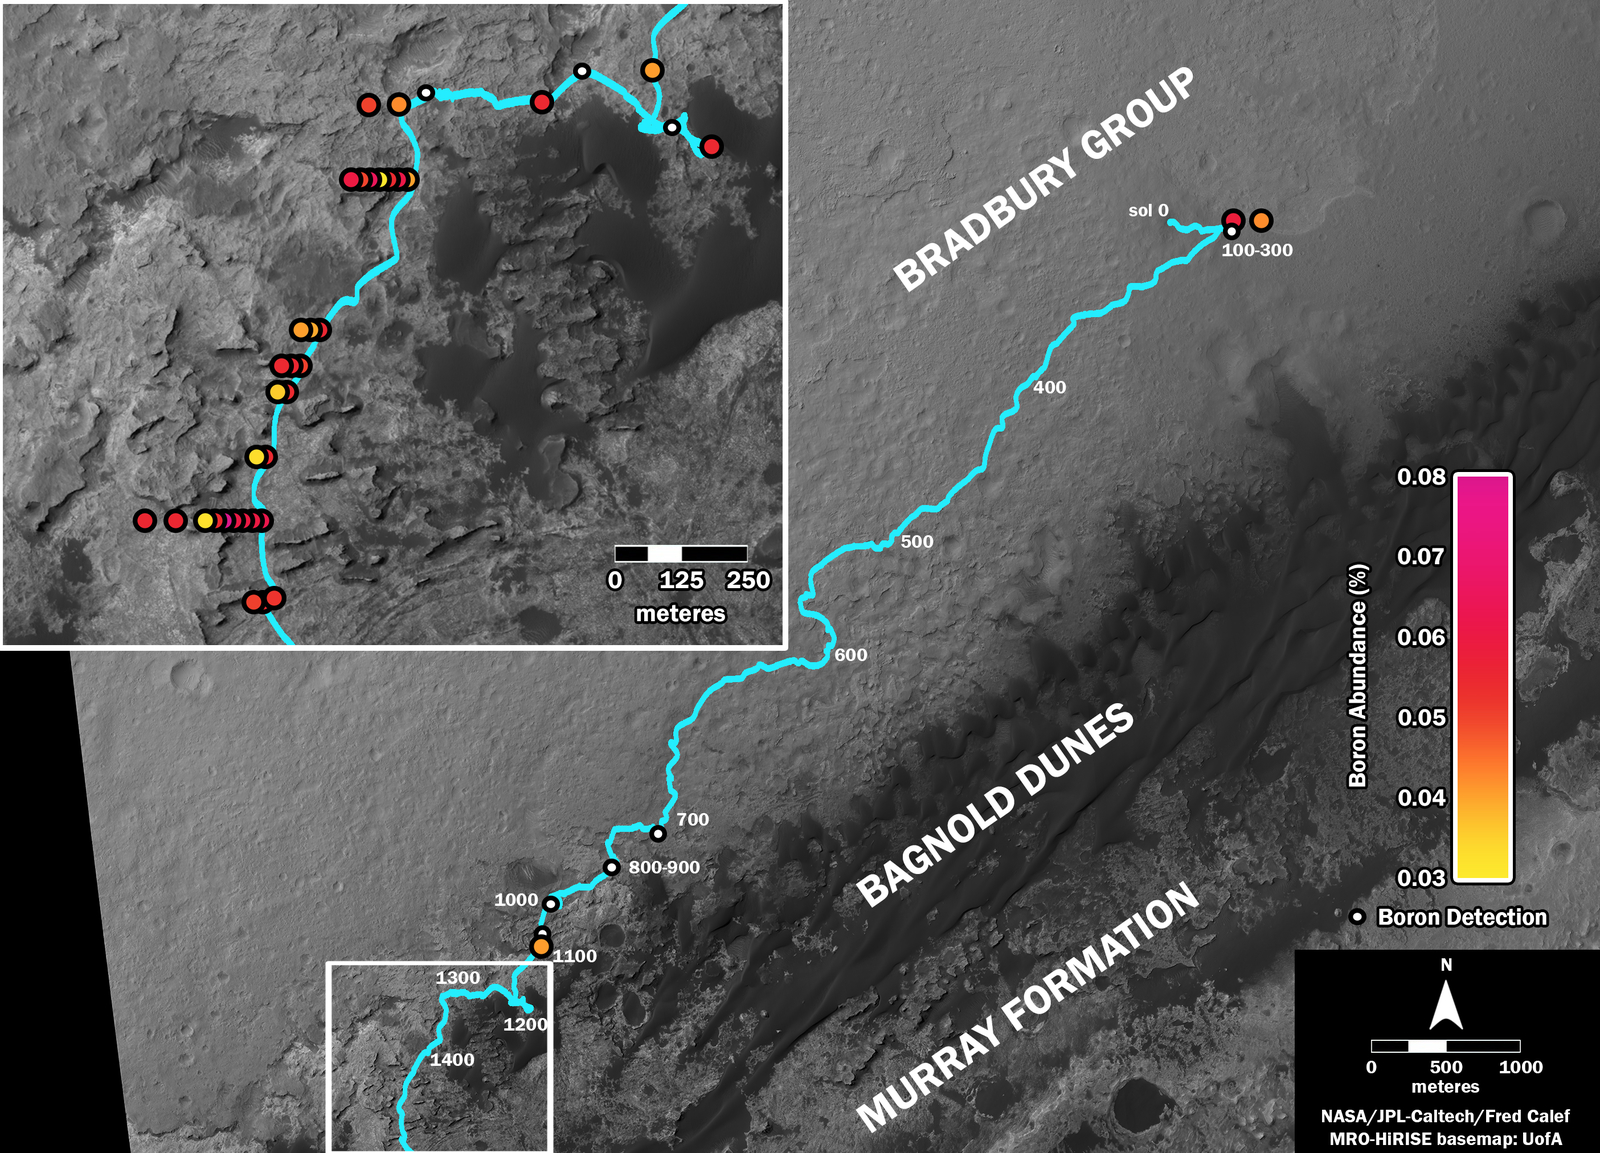 This map shows the route driven by NASA's Curiosity Mars rover (blue line) and locations where the rover's ChemCam instrument detected the element boron (dots, colored by abundance of boron according to the key at right). The inset is a blowup of the most recent portion of the traverse.